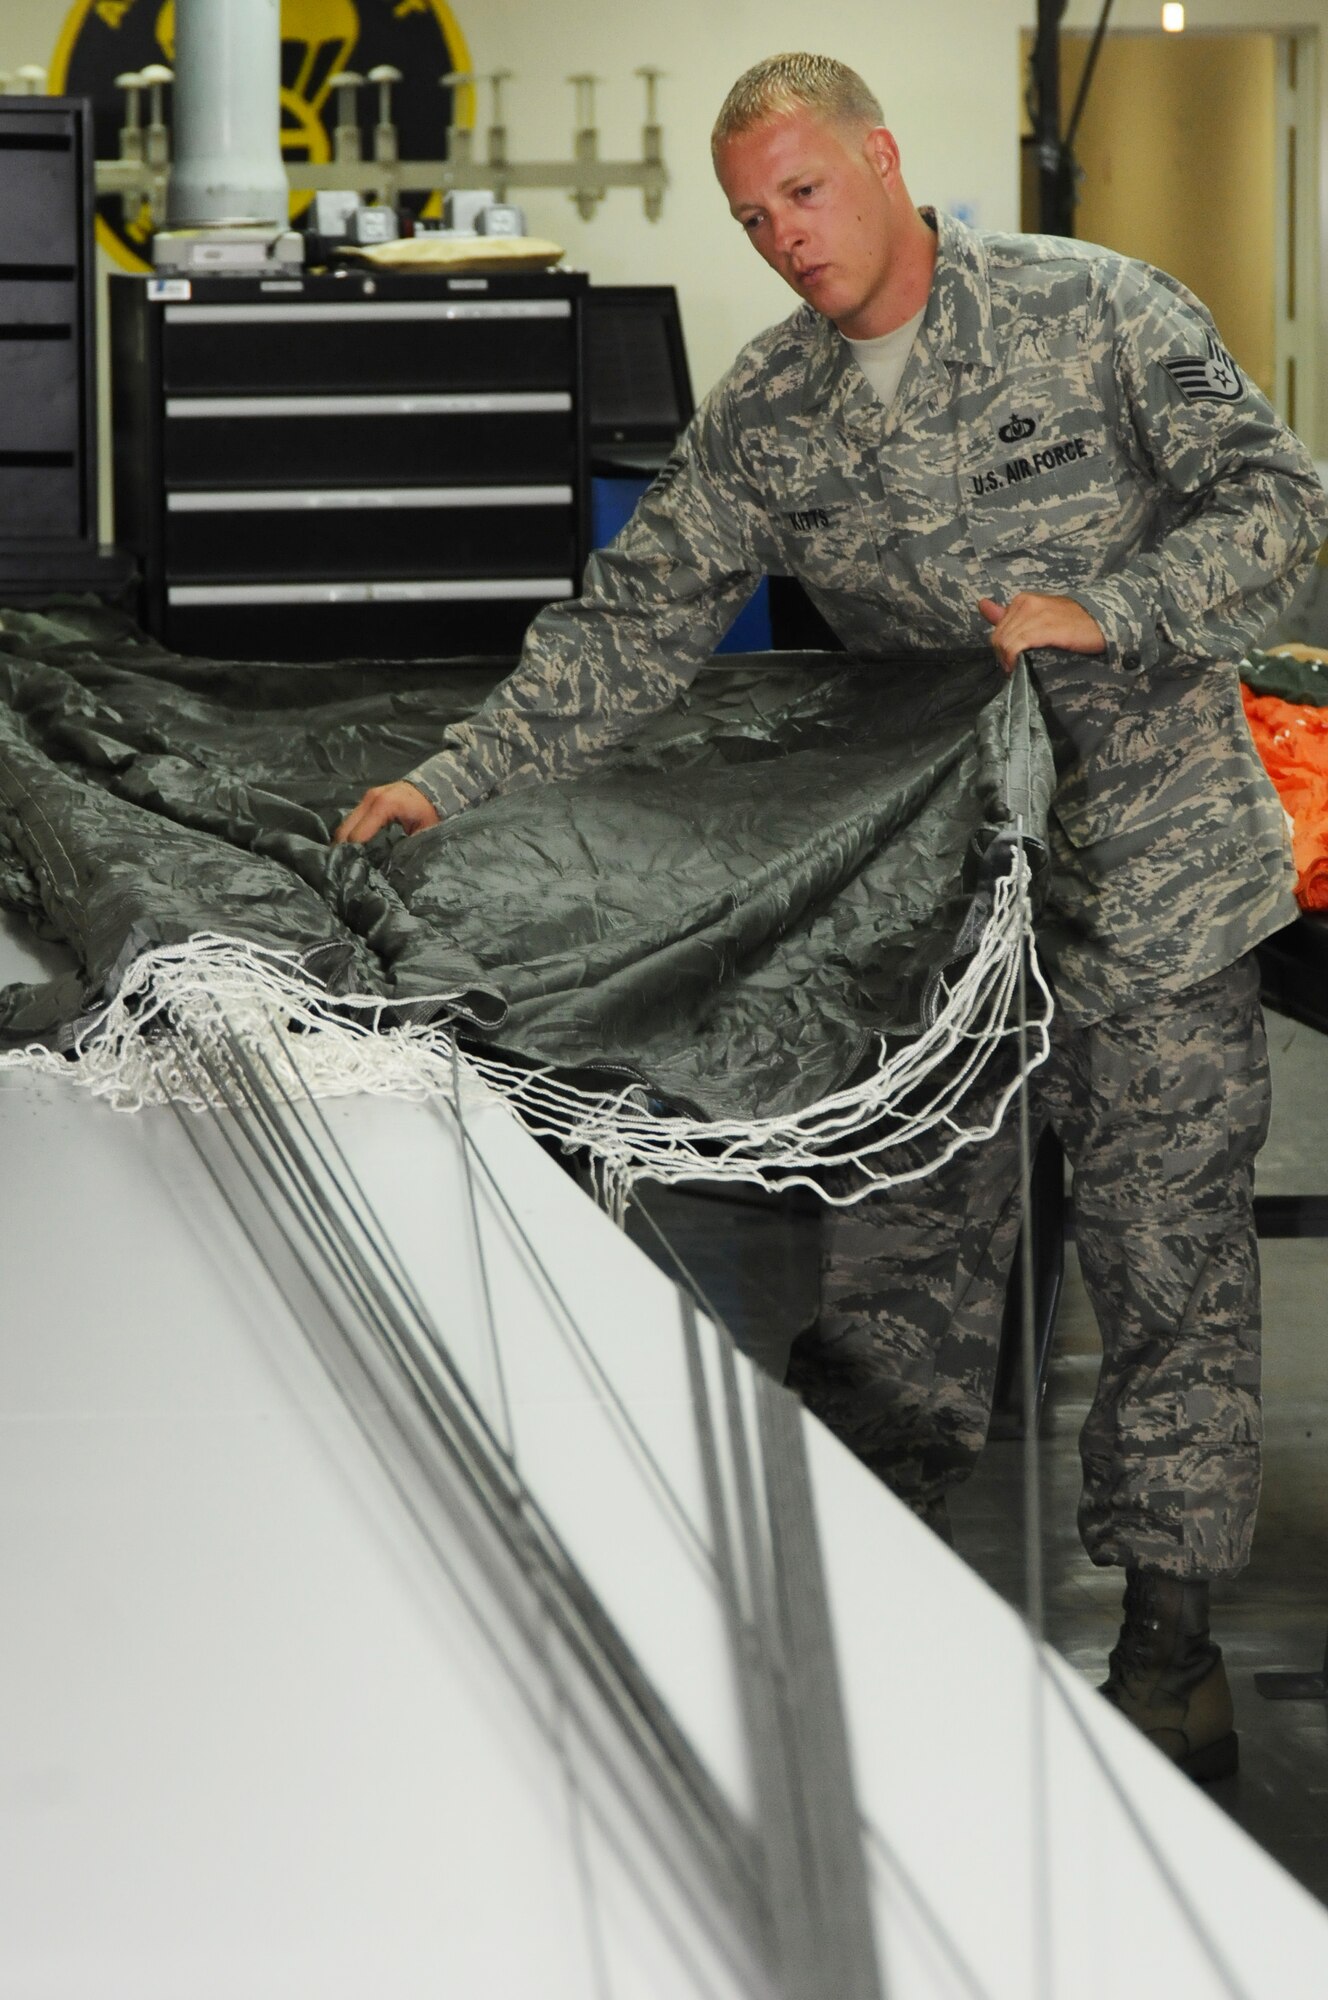 ANDERSEN AIR FORCE BASE, Guam – Staff Sgt. Christopher Kitts, 36th Operations Support Squadron aircrew flight equipment specialist, checks over a parachute, Sept. 11. Sgt Kitts is inspecting for rips and tears or torn lines at the bottom of the chute.  (U.S. Air Force photo by Senior Airman Carlin Leslie) 